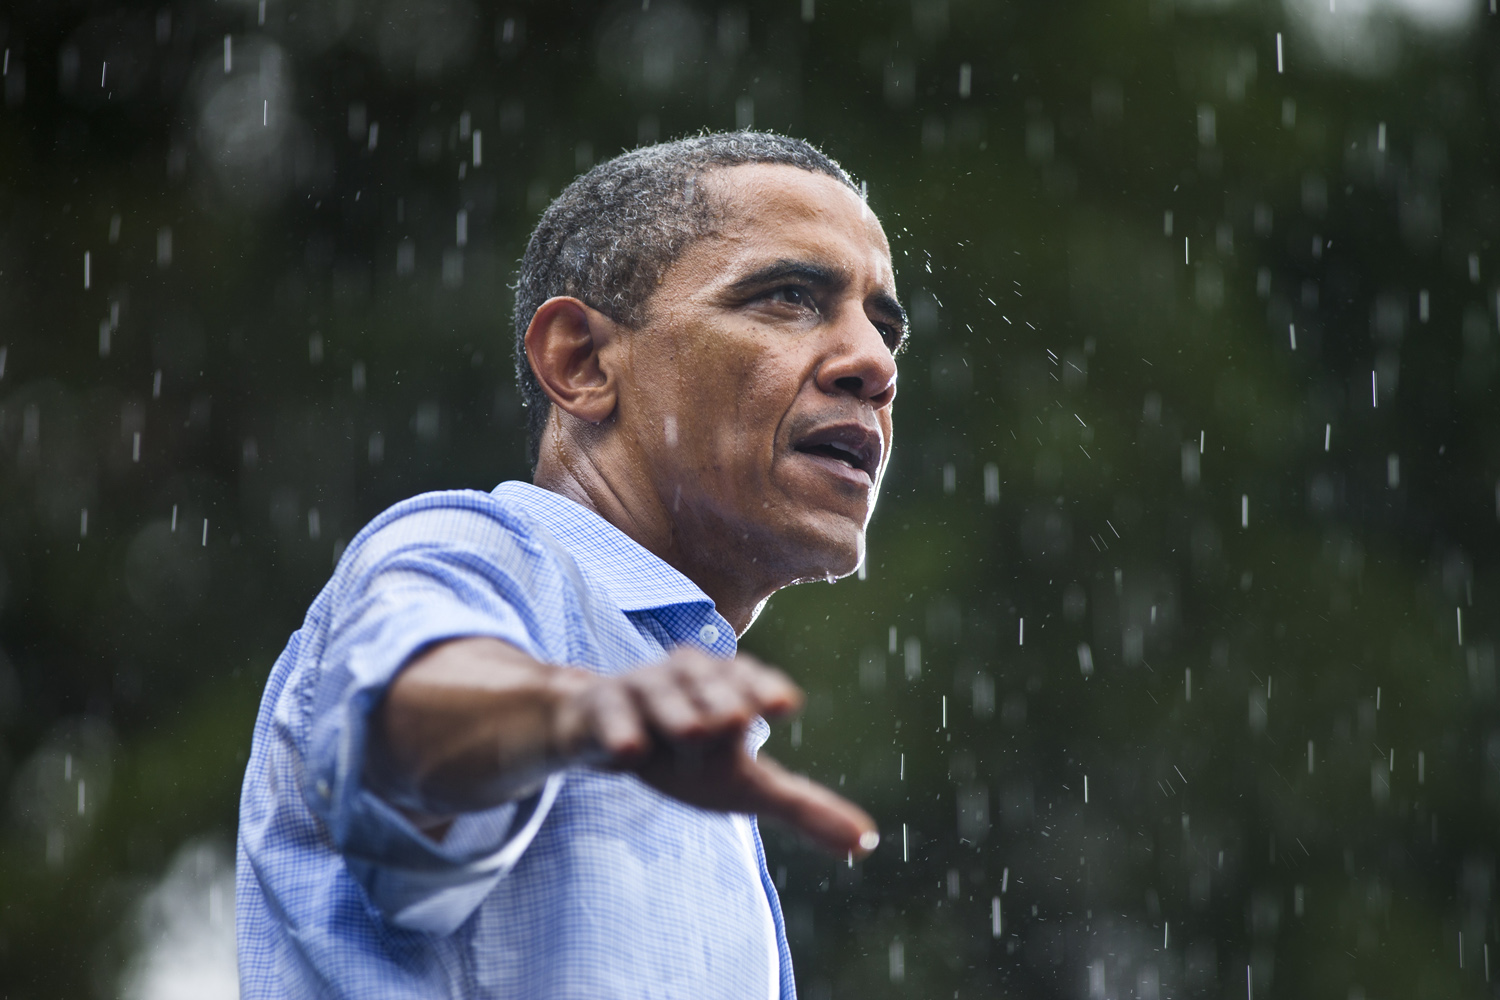 July 14, 2012. Barack Obama speaks in the rain during a campaign rally in Glen Allen, Va.